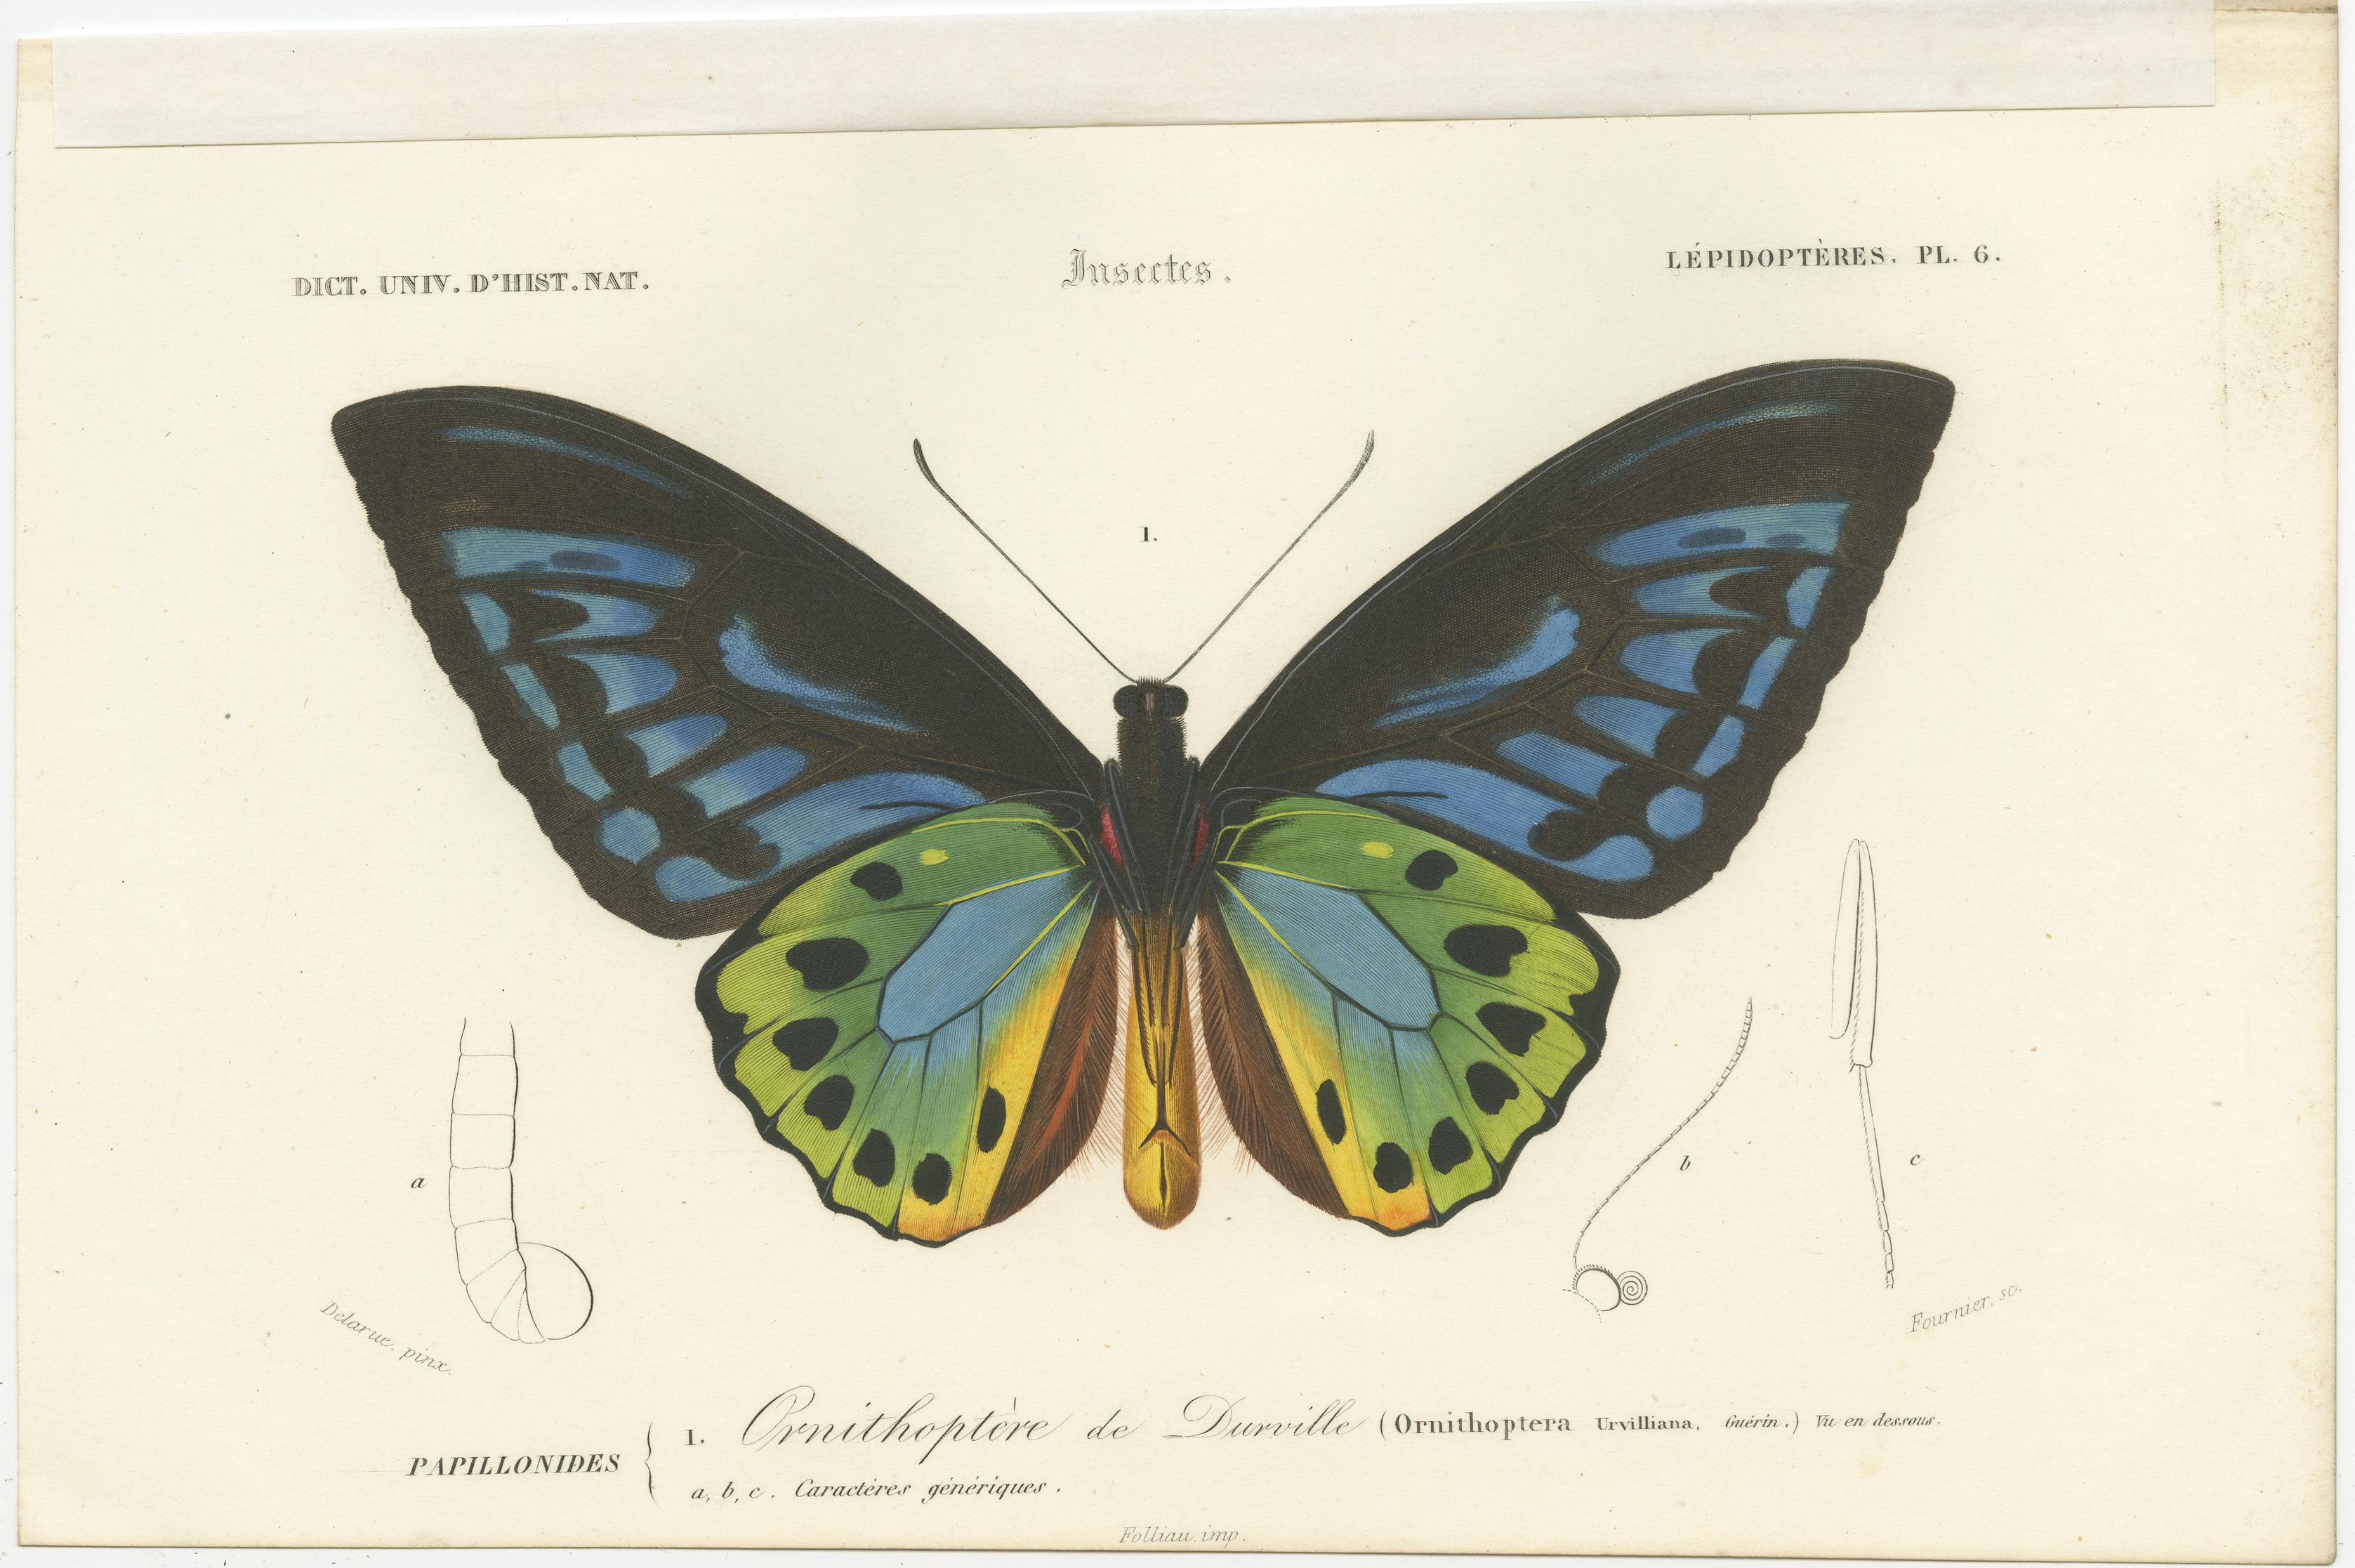 Set of 4 original antique prints of butterflies and moths. These prints originate from 'Dictionnaire universel d'Histoire Naturelle' by d'Orbigny. Published 1861. 

Charles Henry Dessalines d'Orbigny was a French botanist and geologist